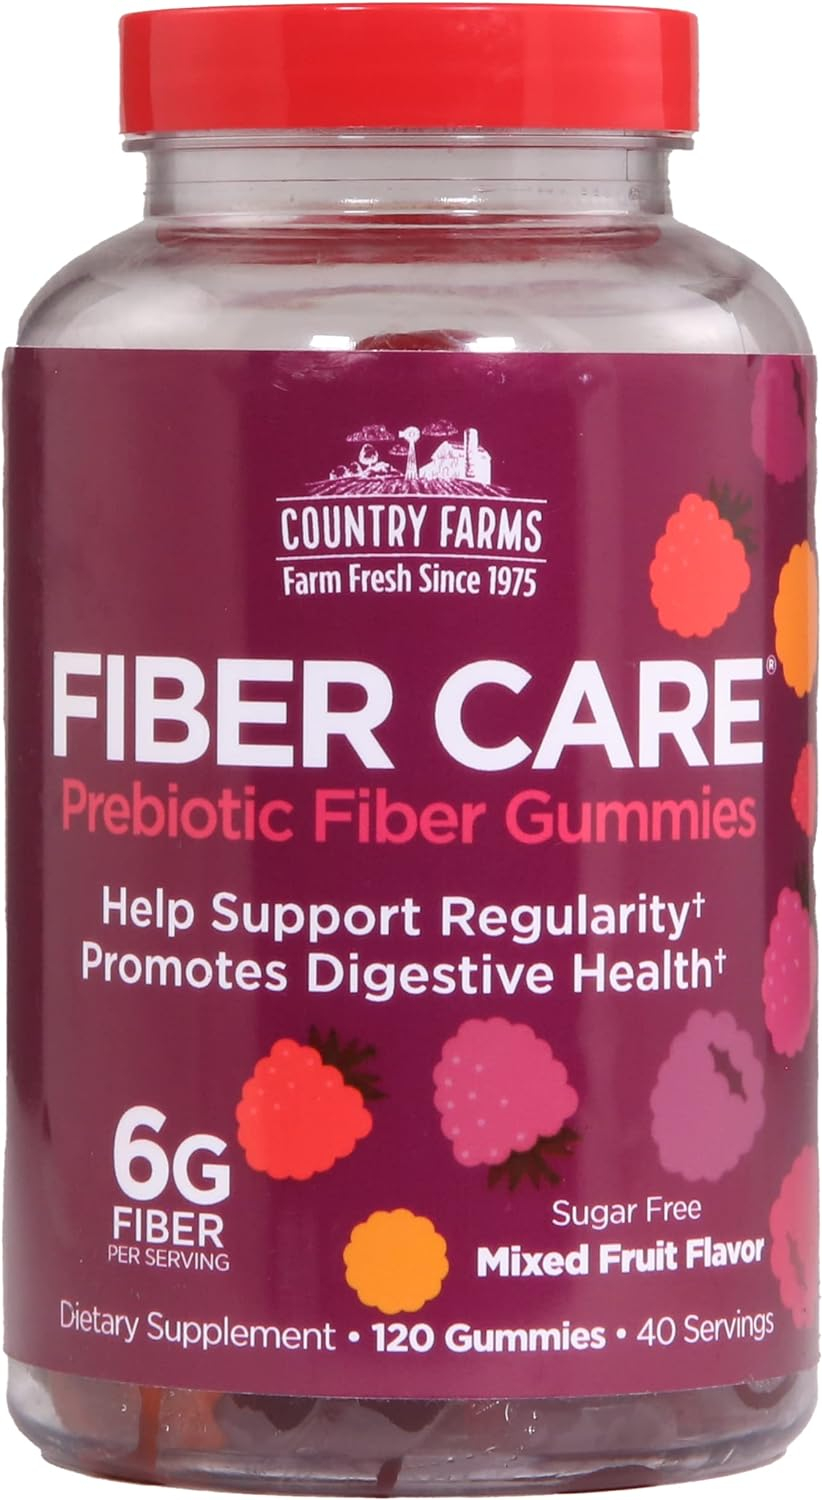 Country Farms Fiber Care Prebiotic Gummies, 6g of Fiber Per Serving, FOS from Beets, Digestive Health, Supports Regularity, Mixed Fruit Flavor, 120 Gummies, 40 Servings, Multi